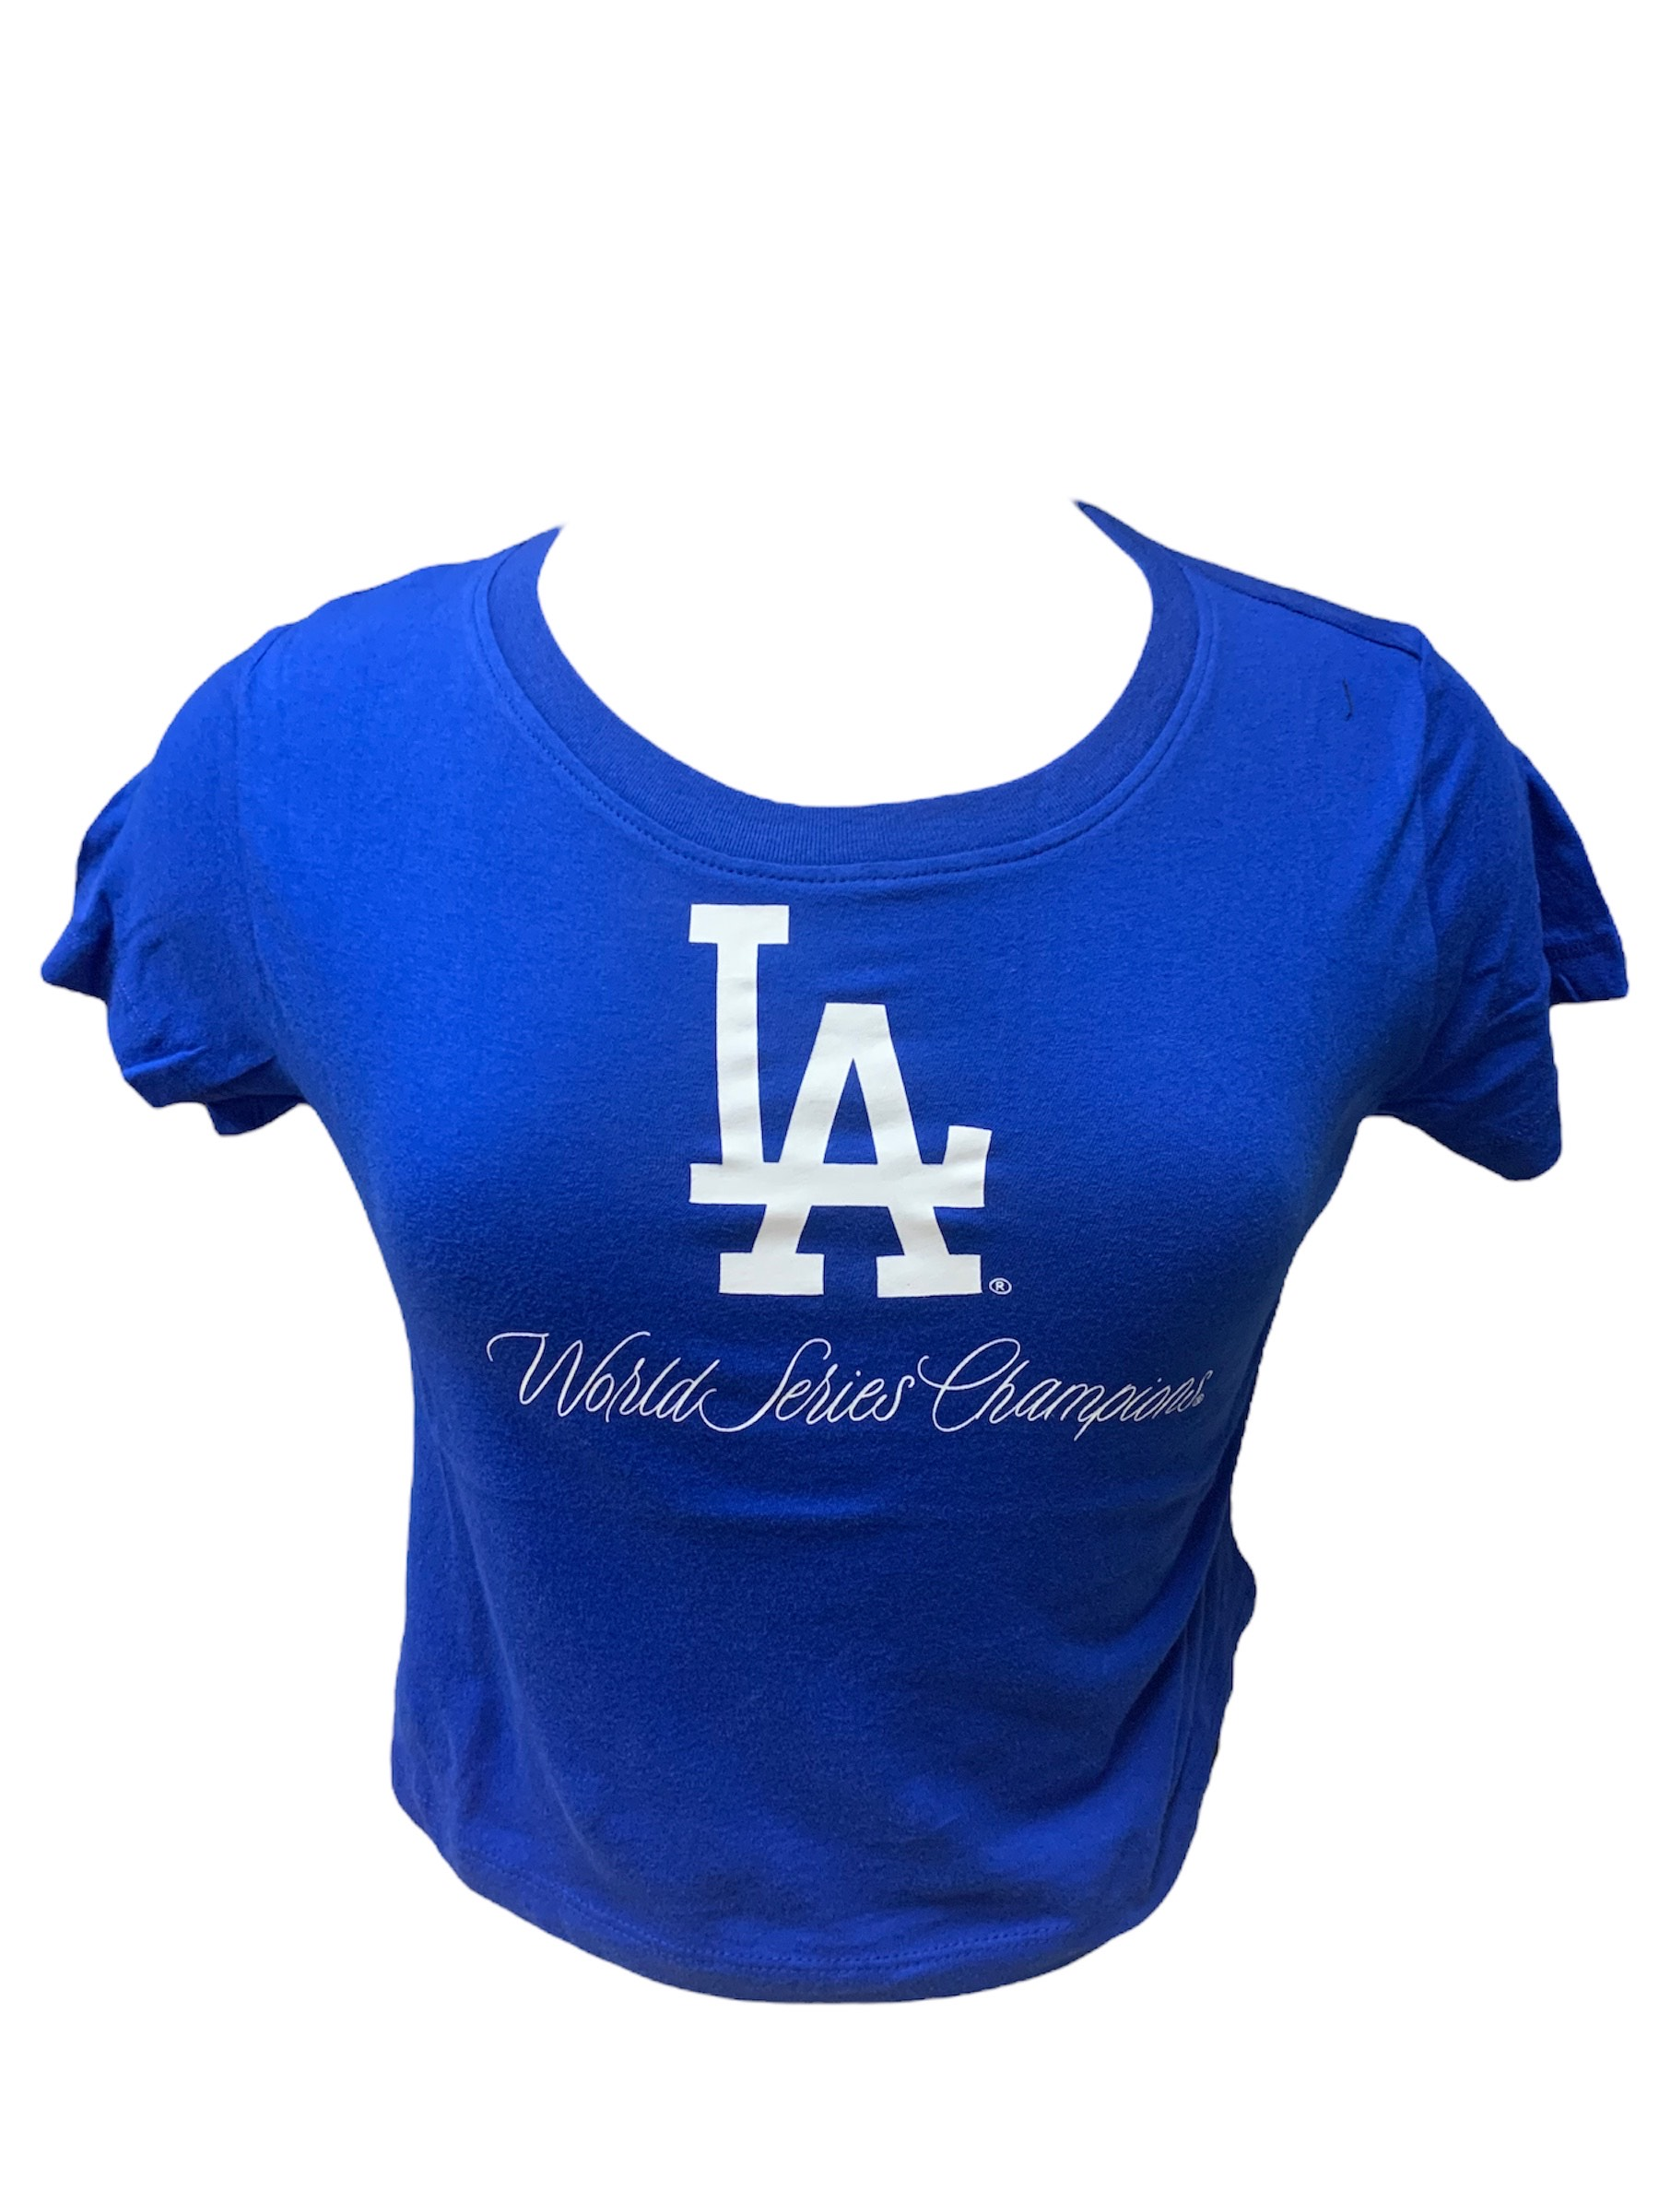 The Best Dodgers World Series Champions Merch Available To Buy